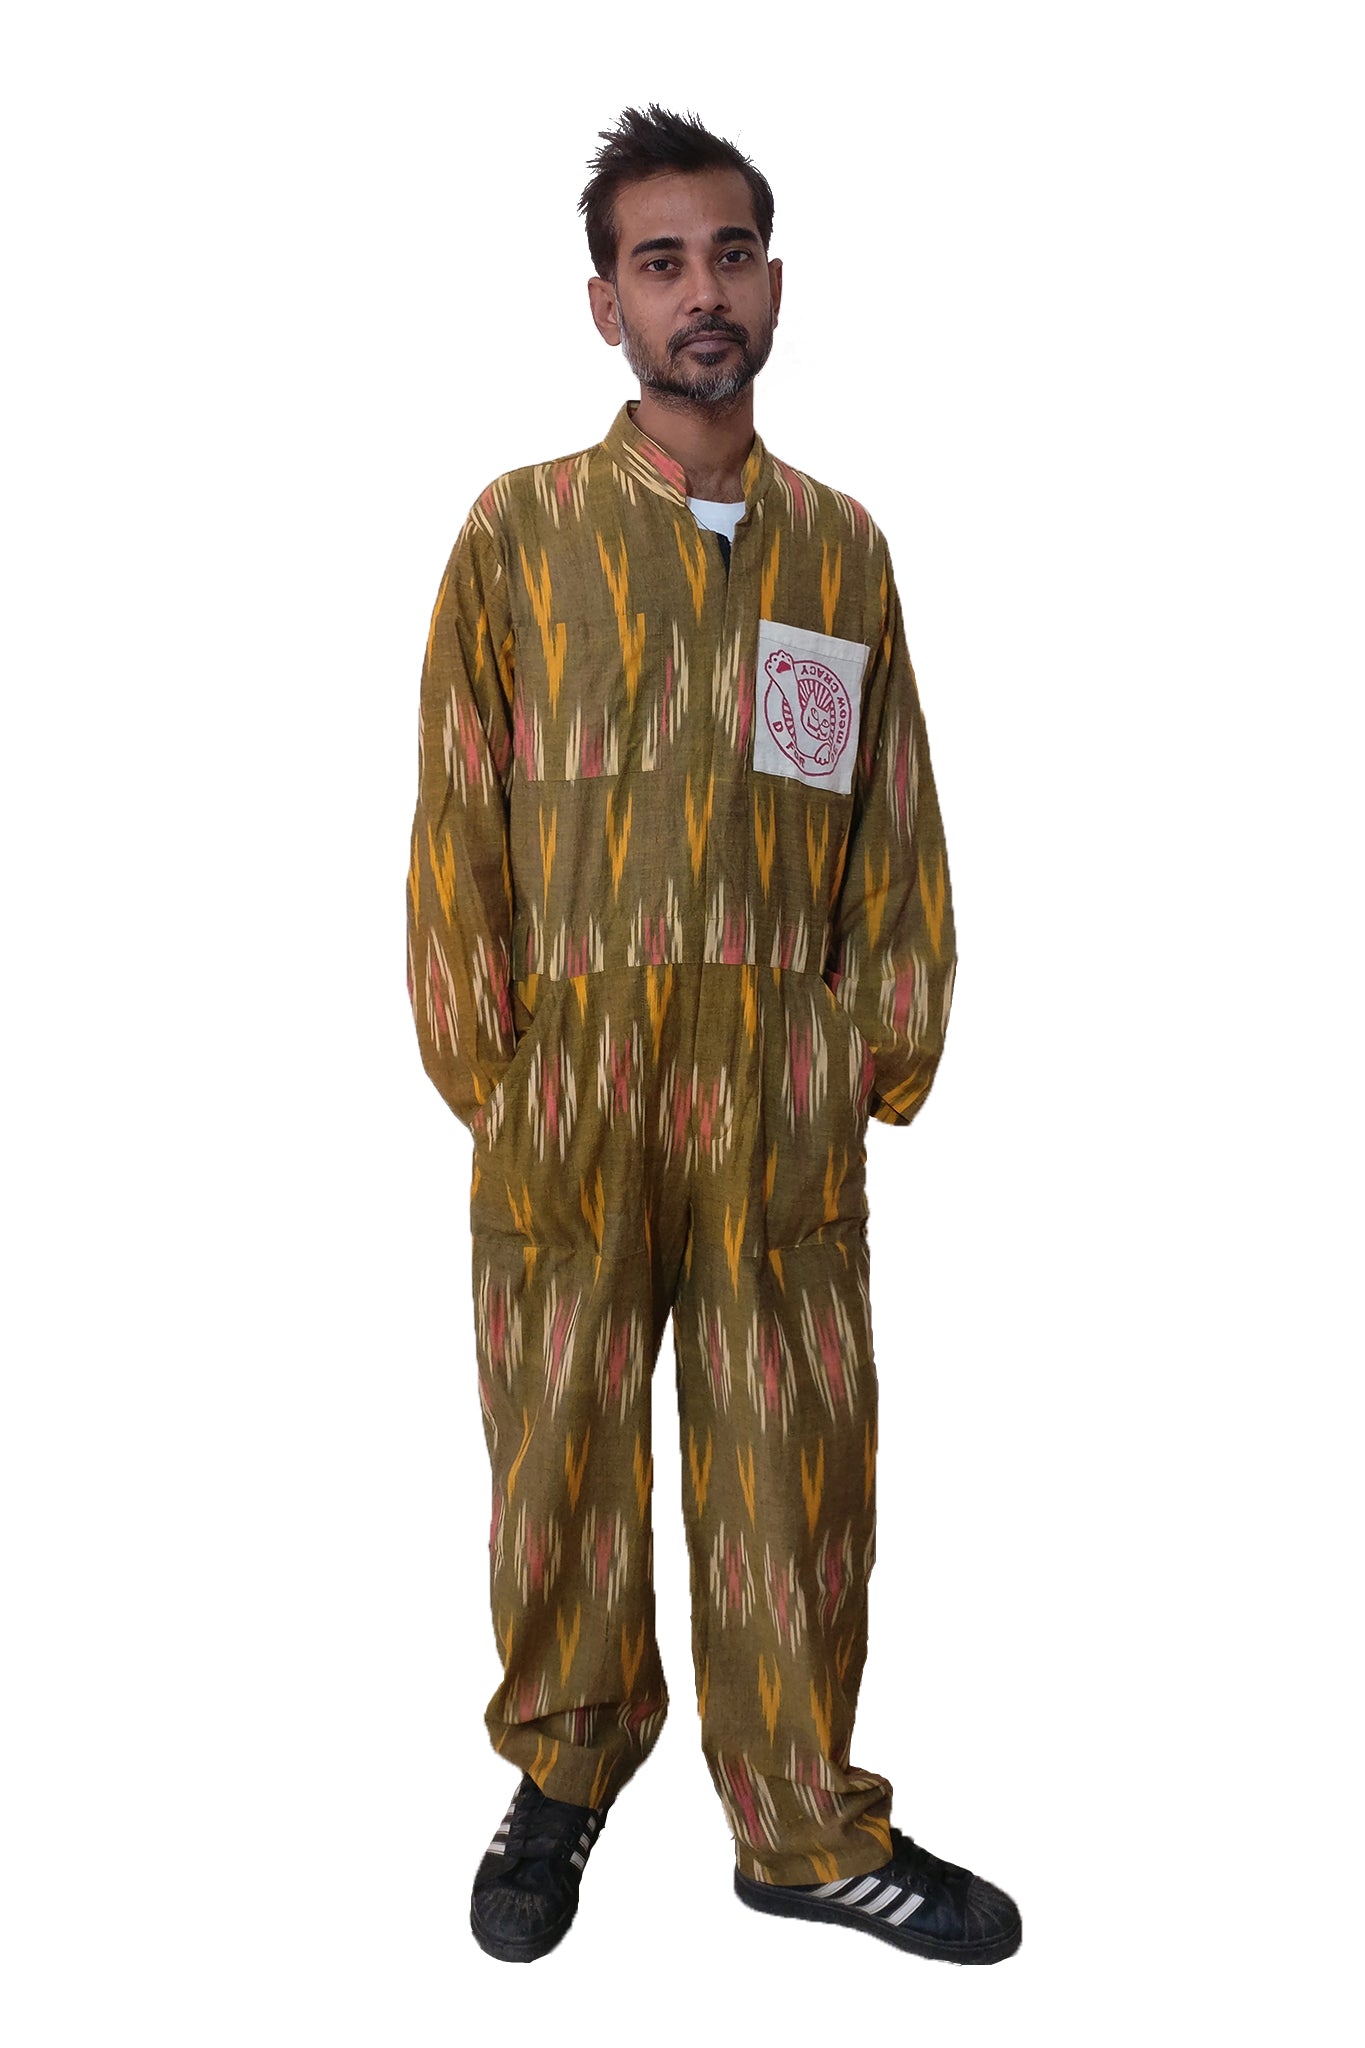 Classic boiler suit (coverall) for daily wear with an Indian traditional fabric, yellow handloom cotton Ikat, for all the bodies (unisex) and body types! The oversized silhouette gives cool vibes. If you love jumpsuits, definitely try this! Shop online. - Man model